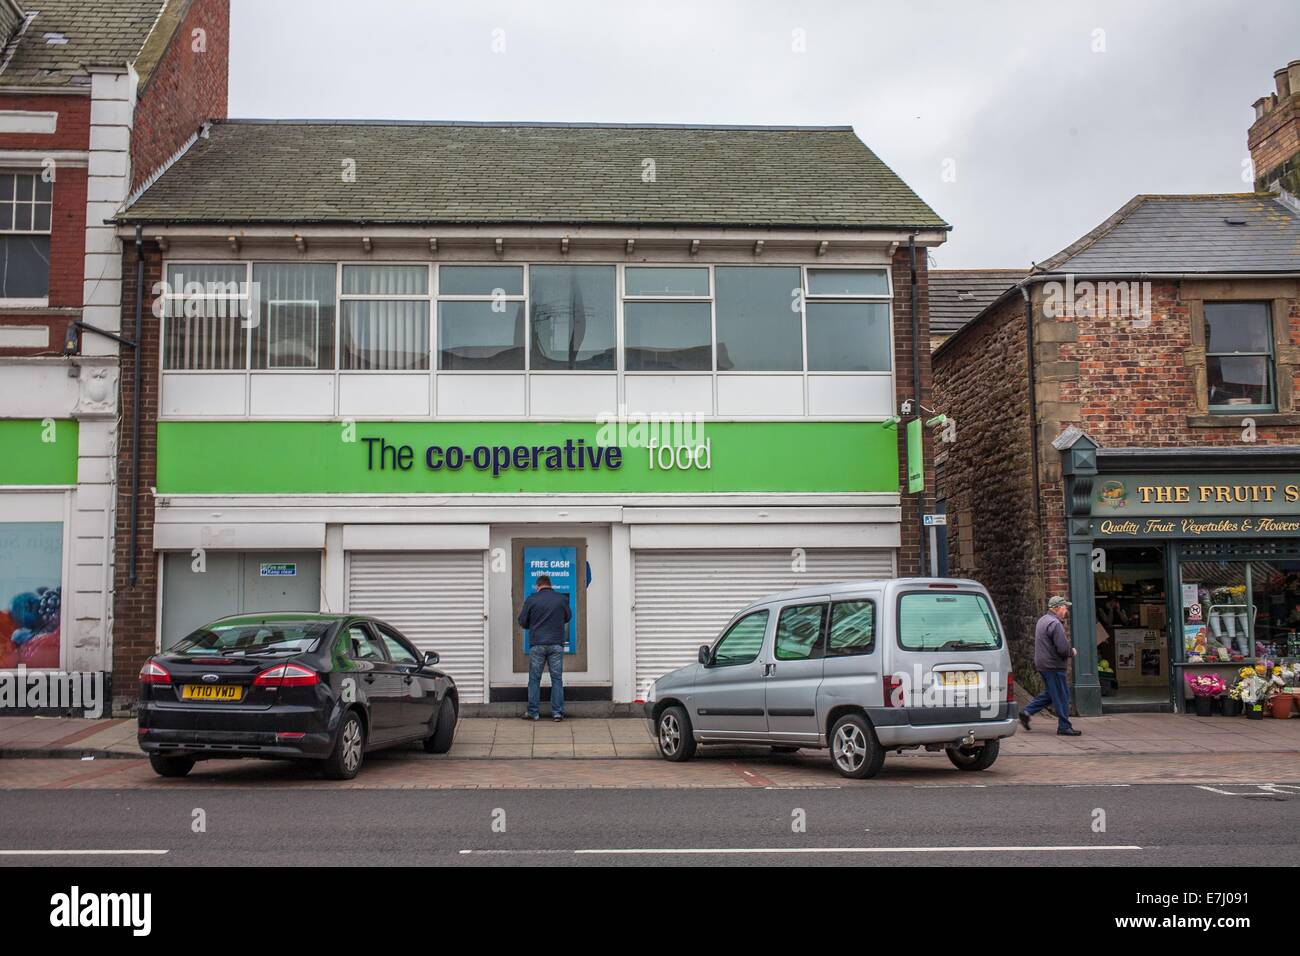 A man at a cash machine ATM at the Co-operative food Supermarket in Amble, Northumberland UK Stock Photo